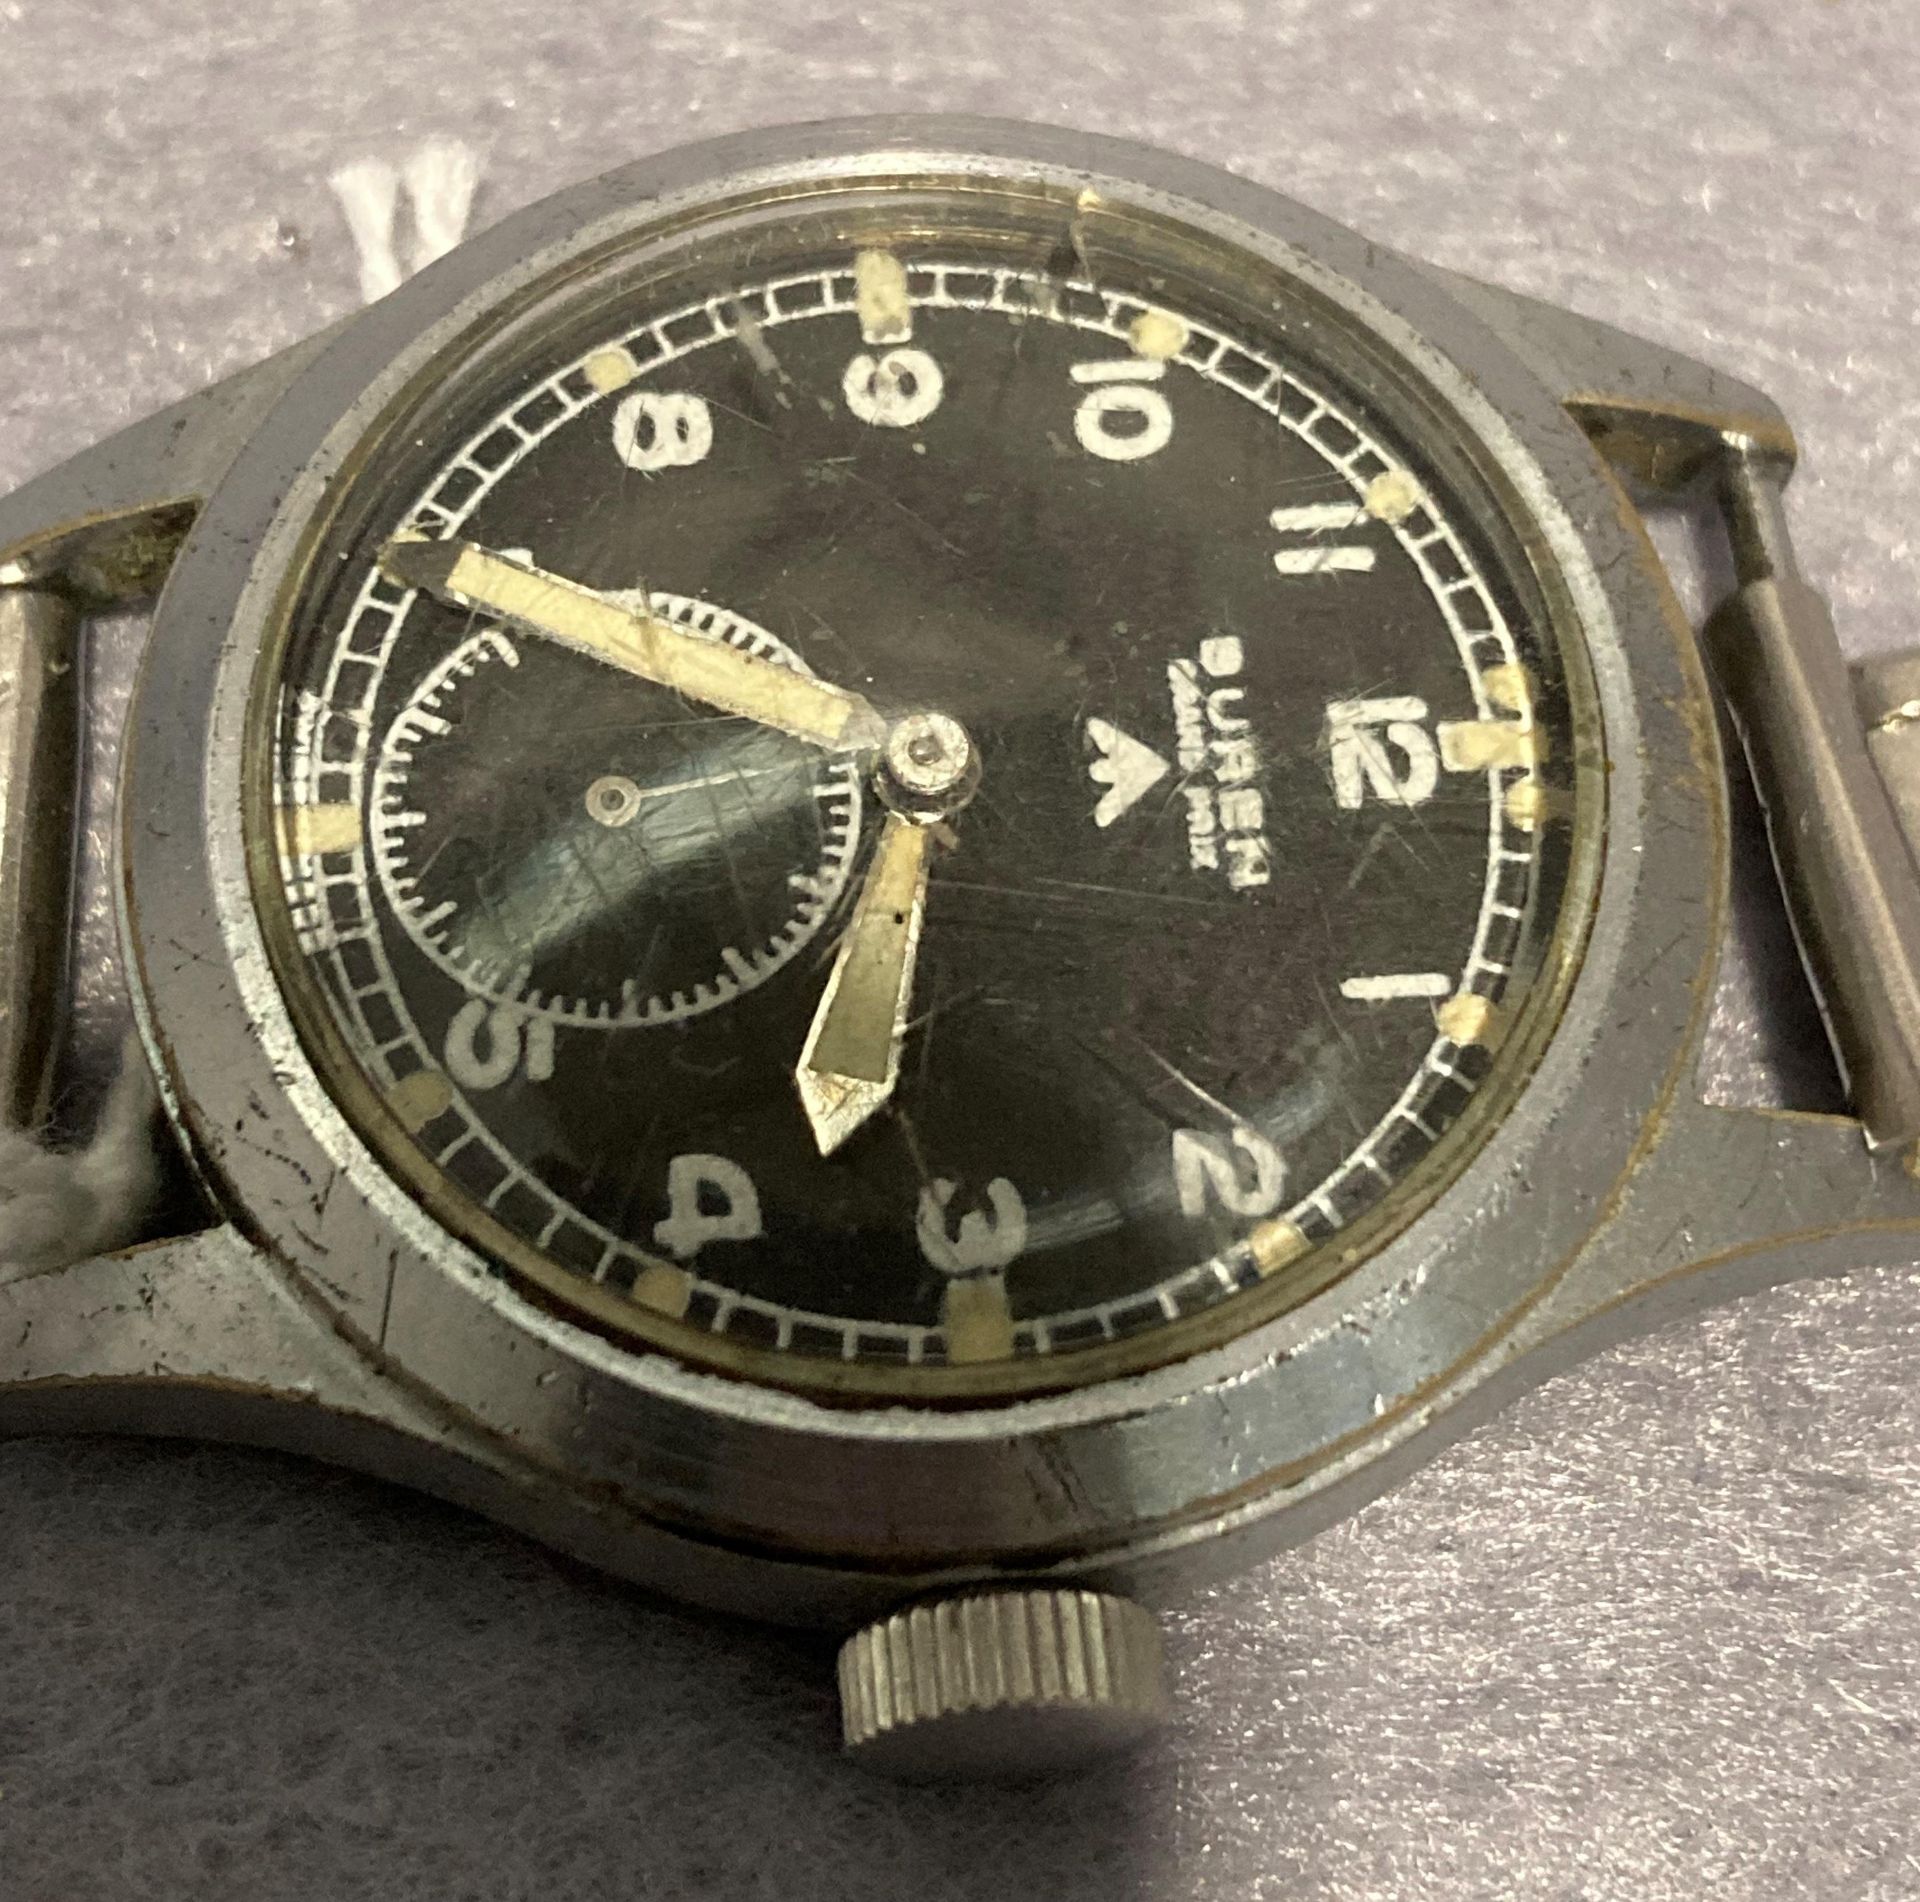 Military issue 'Buren - Grand Prix' WWW Dirty Dozen British Army watch with marking to back, - Image 2 of 9